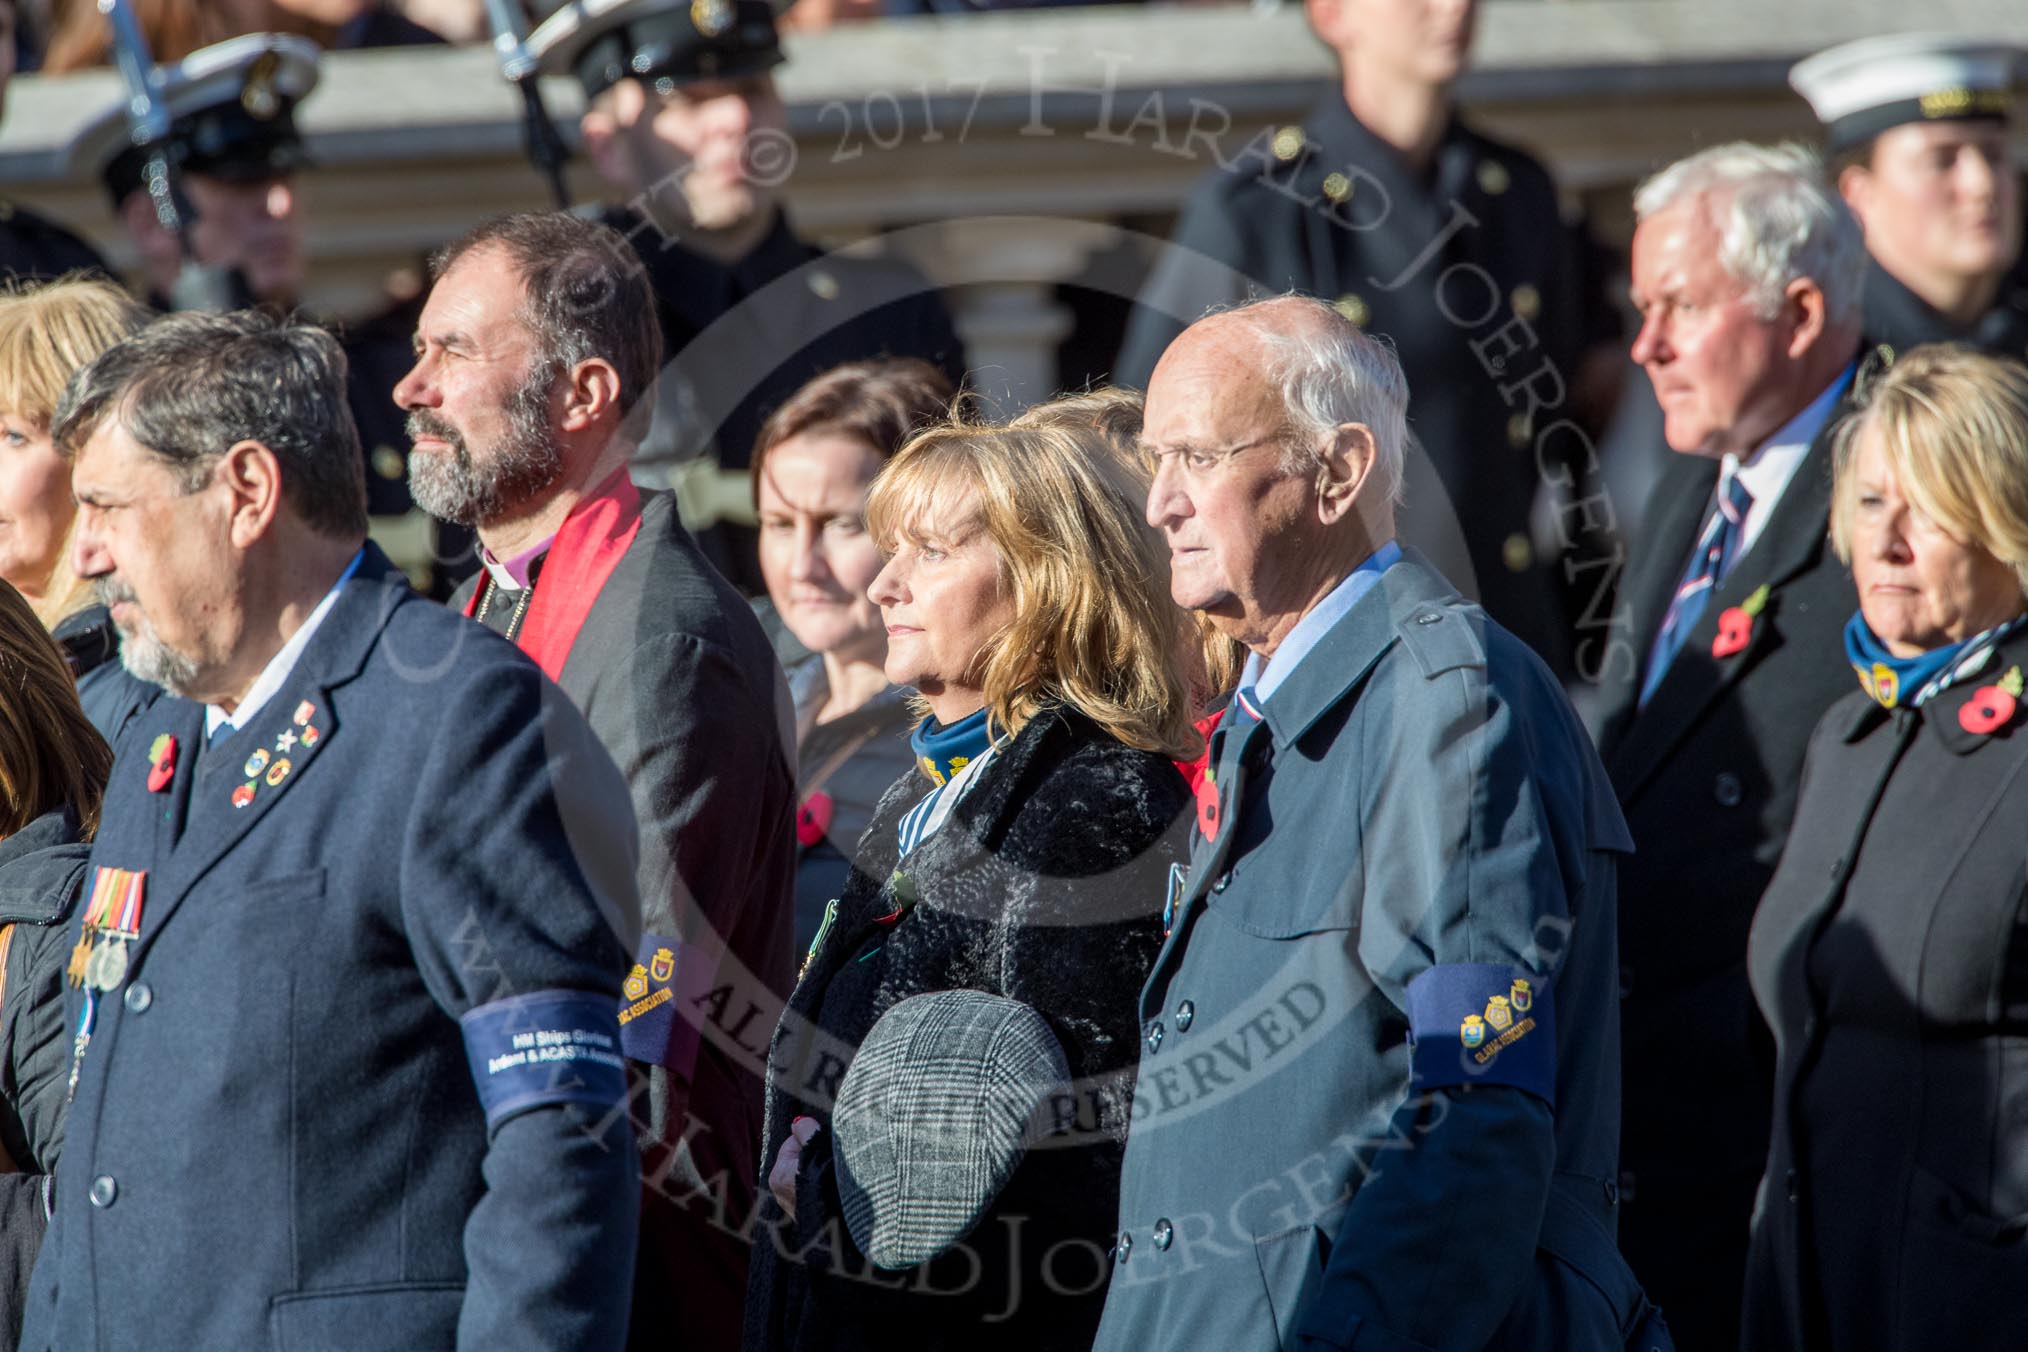 HMS Glorious, Ardent & Acasta Association  (GLARAC) Association (Group E17, 27 members) during the Royal British Legion March Past on Remembrance Sunday at the Cenotaph, Whitehall, Westminster, London, 11 November 2018, 11:43.